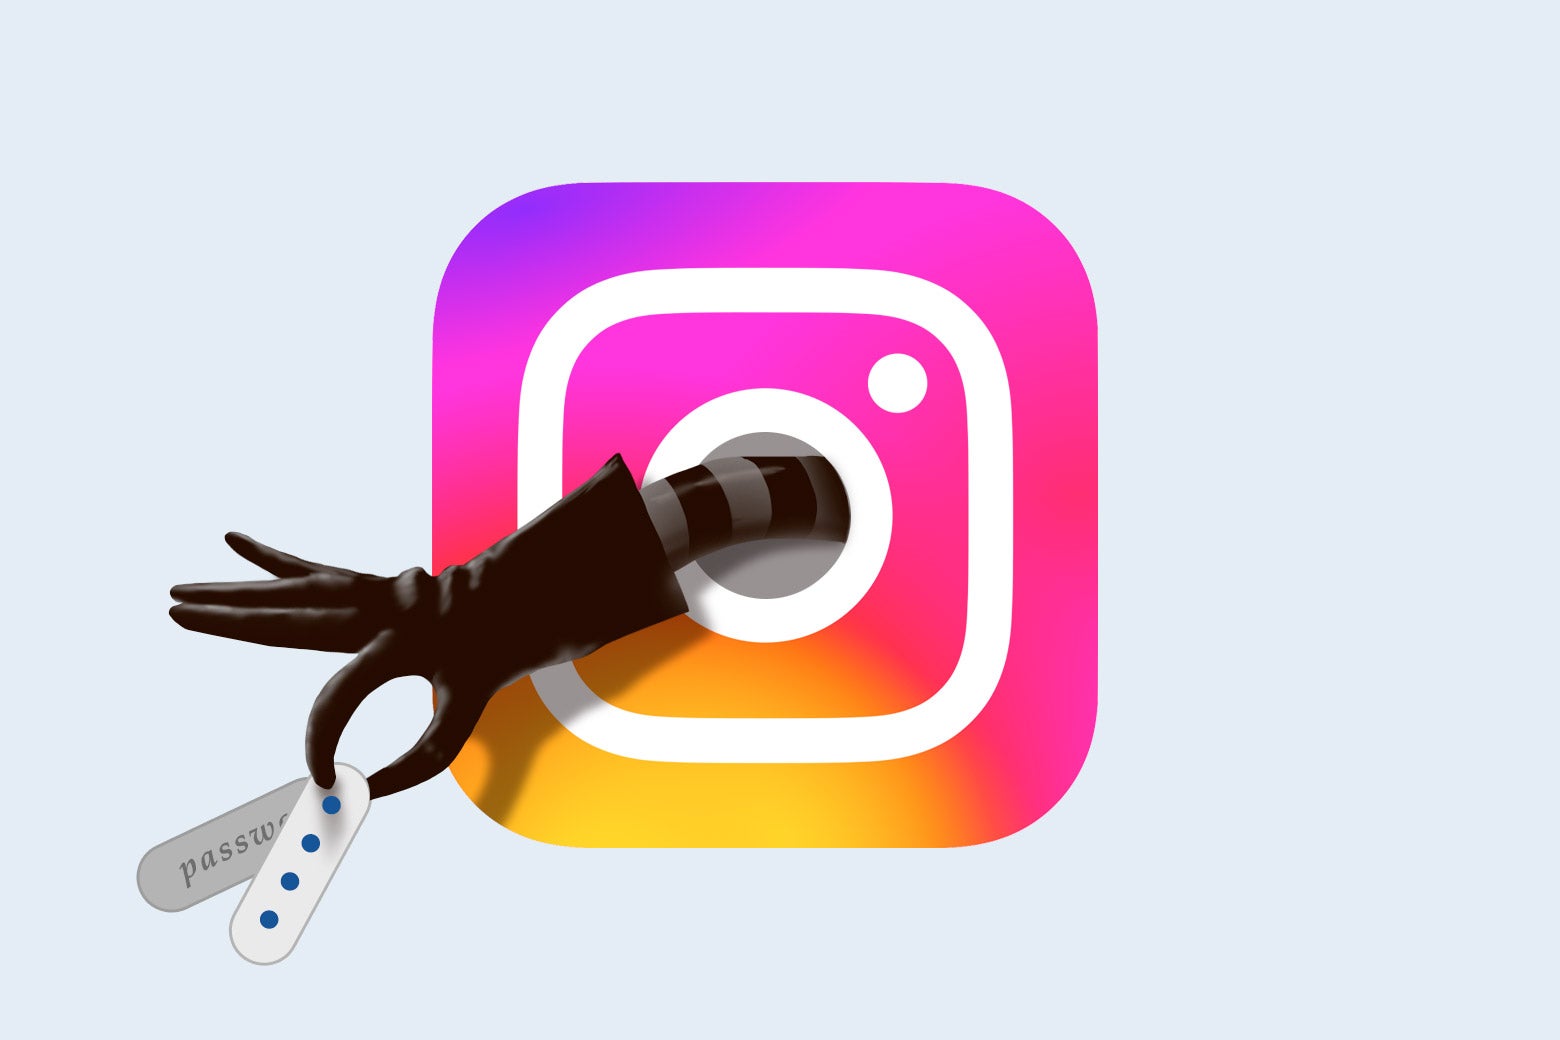 What can you do if your Facebook or Instagram account gets hacked?